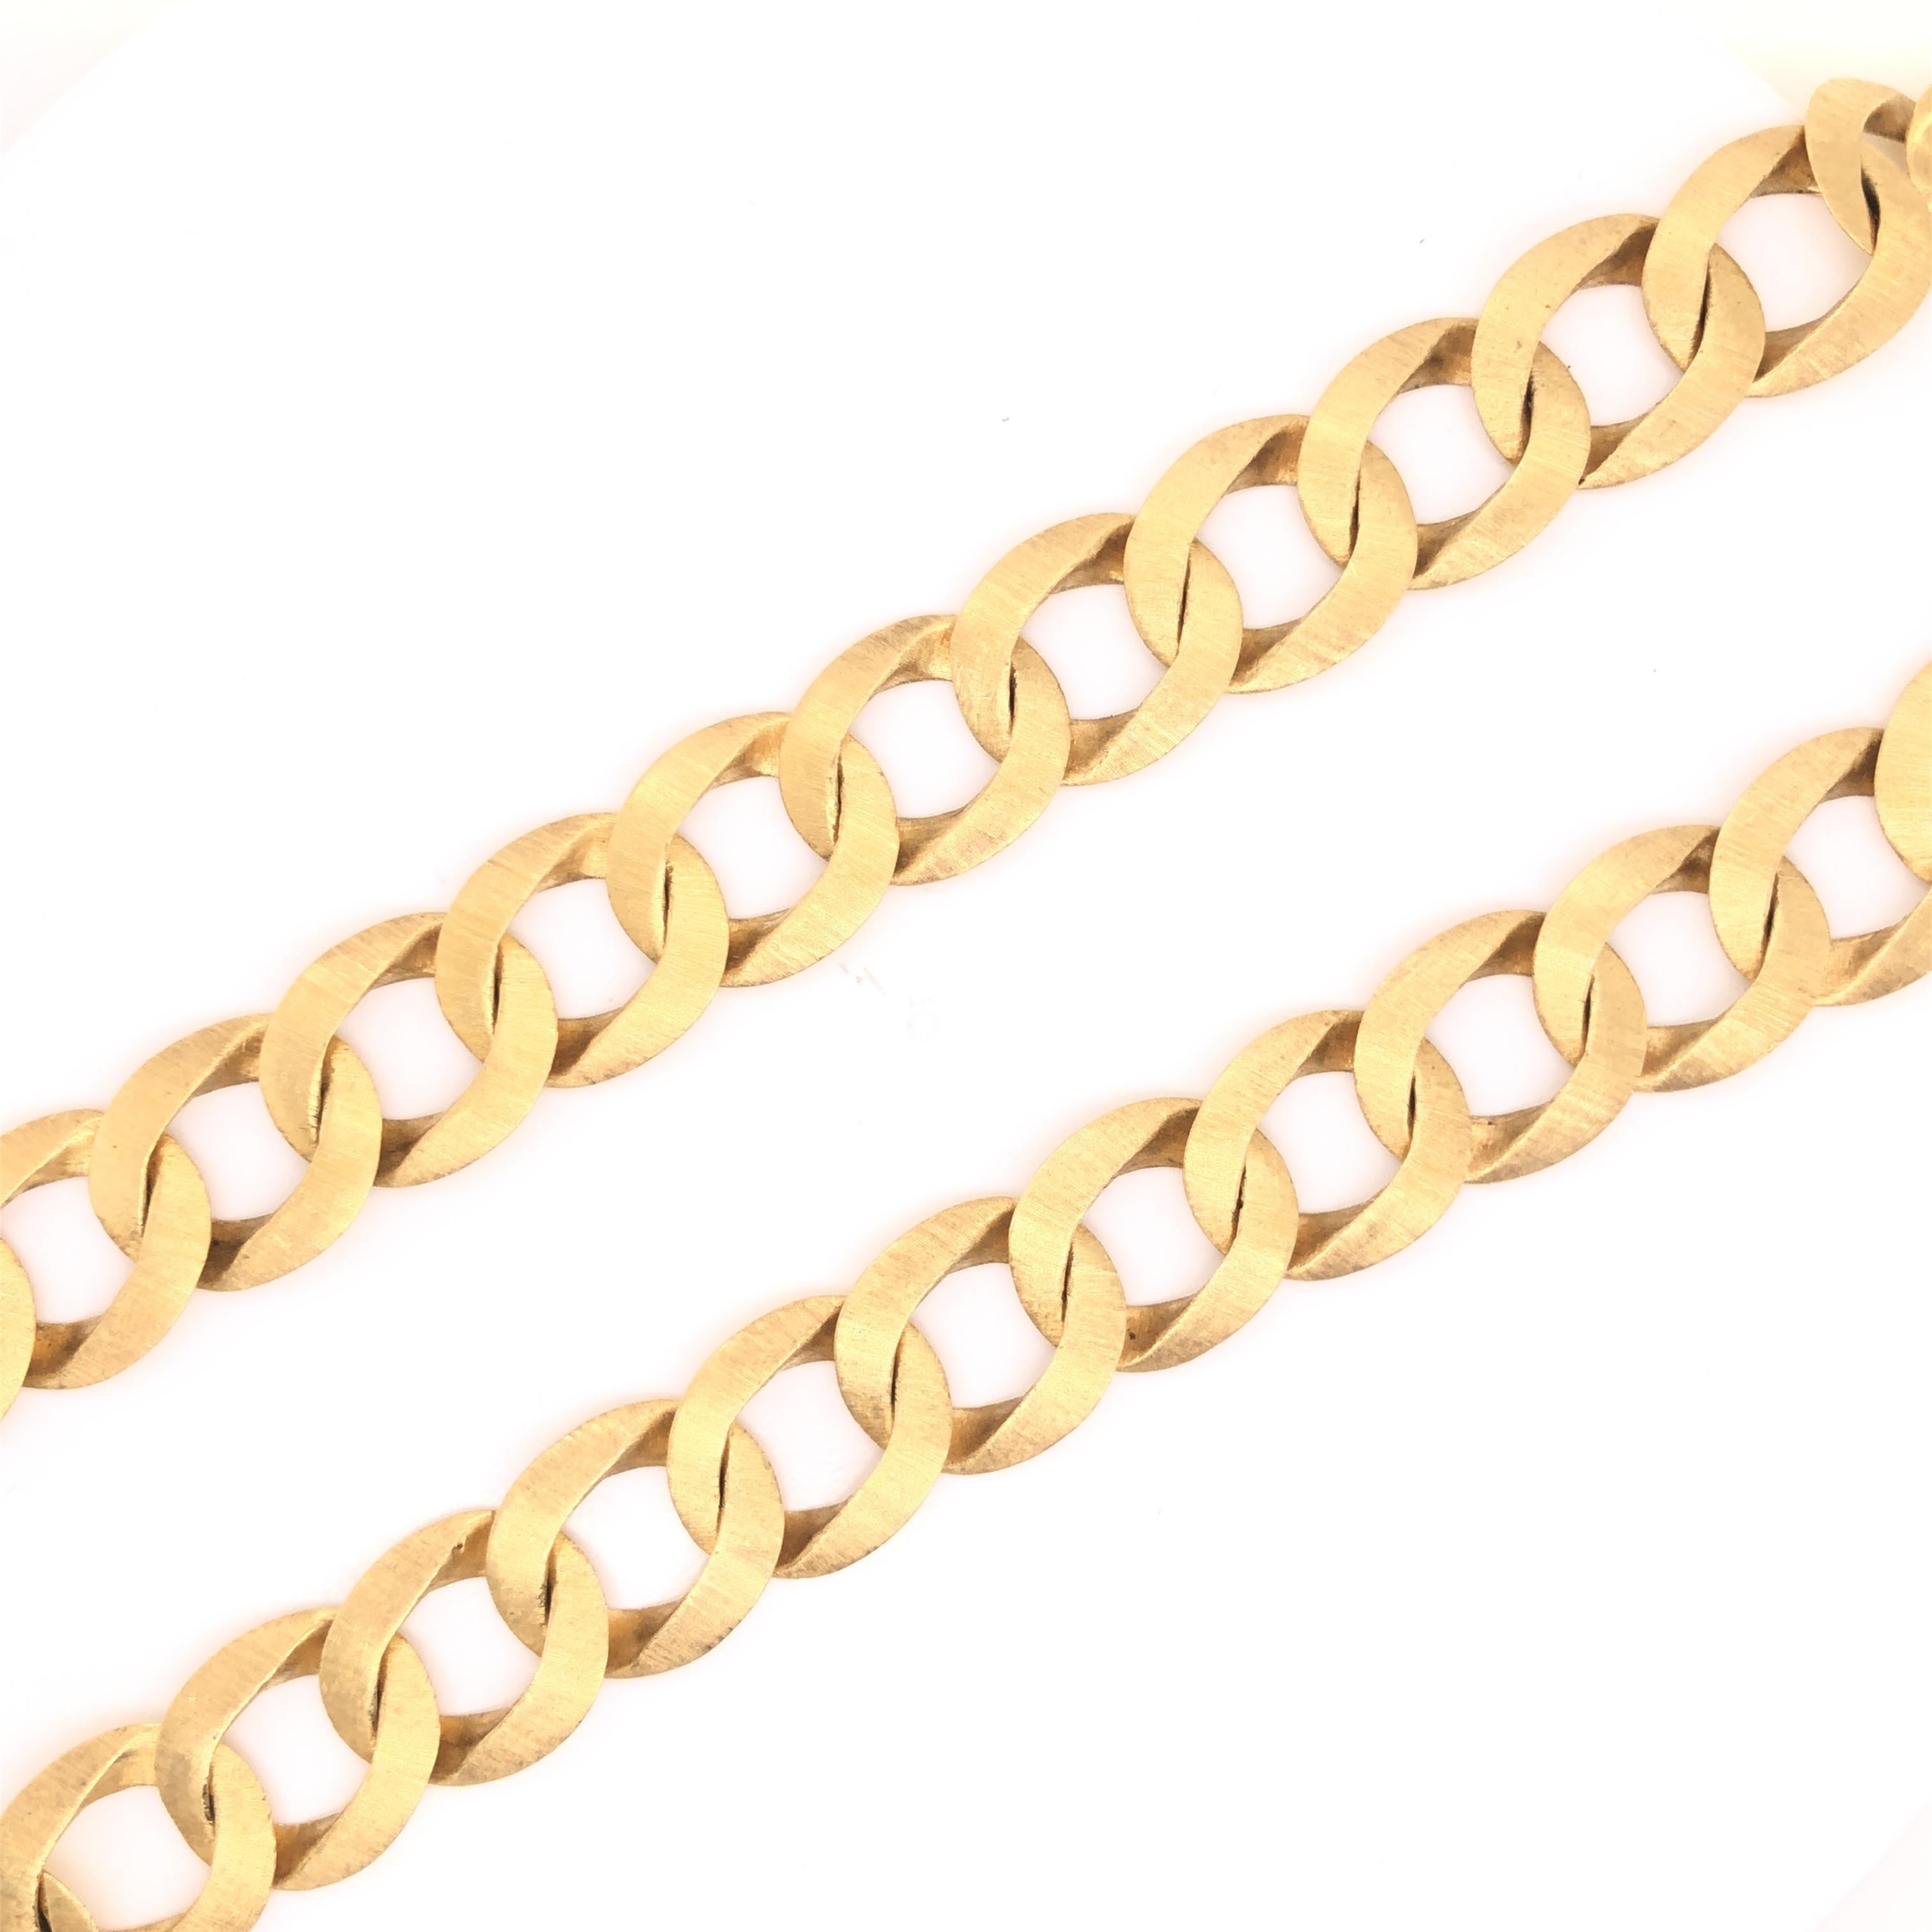 Beautiful classic design by famed designer Mario Buccellati. This vintage necklace has never been more in style than today. The necklace is crafted in 18k yellow gold and shows a satin finish on the front portion of the design.  The wide open link